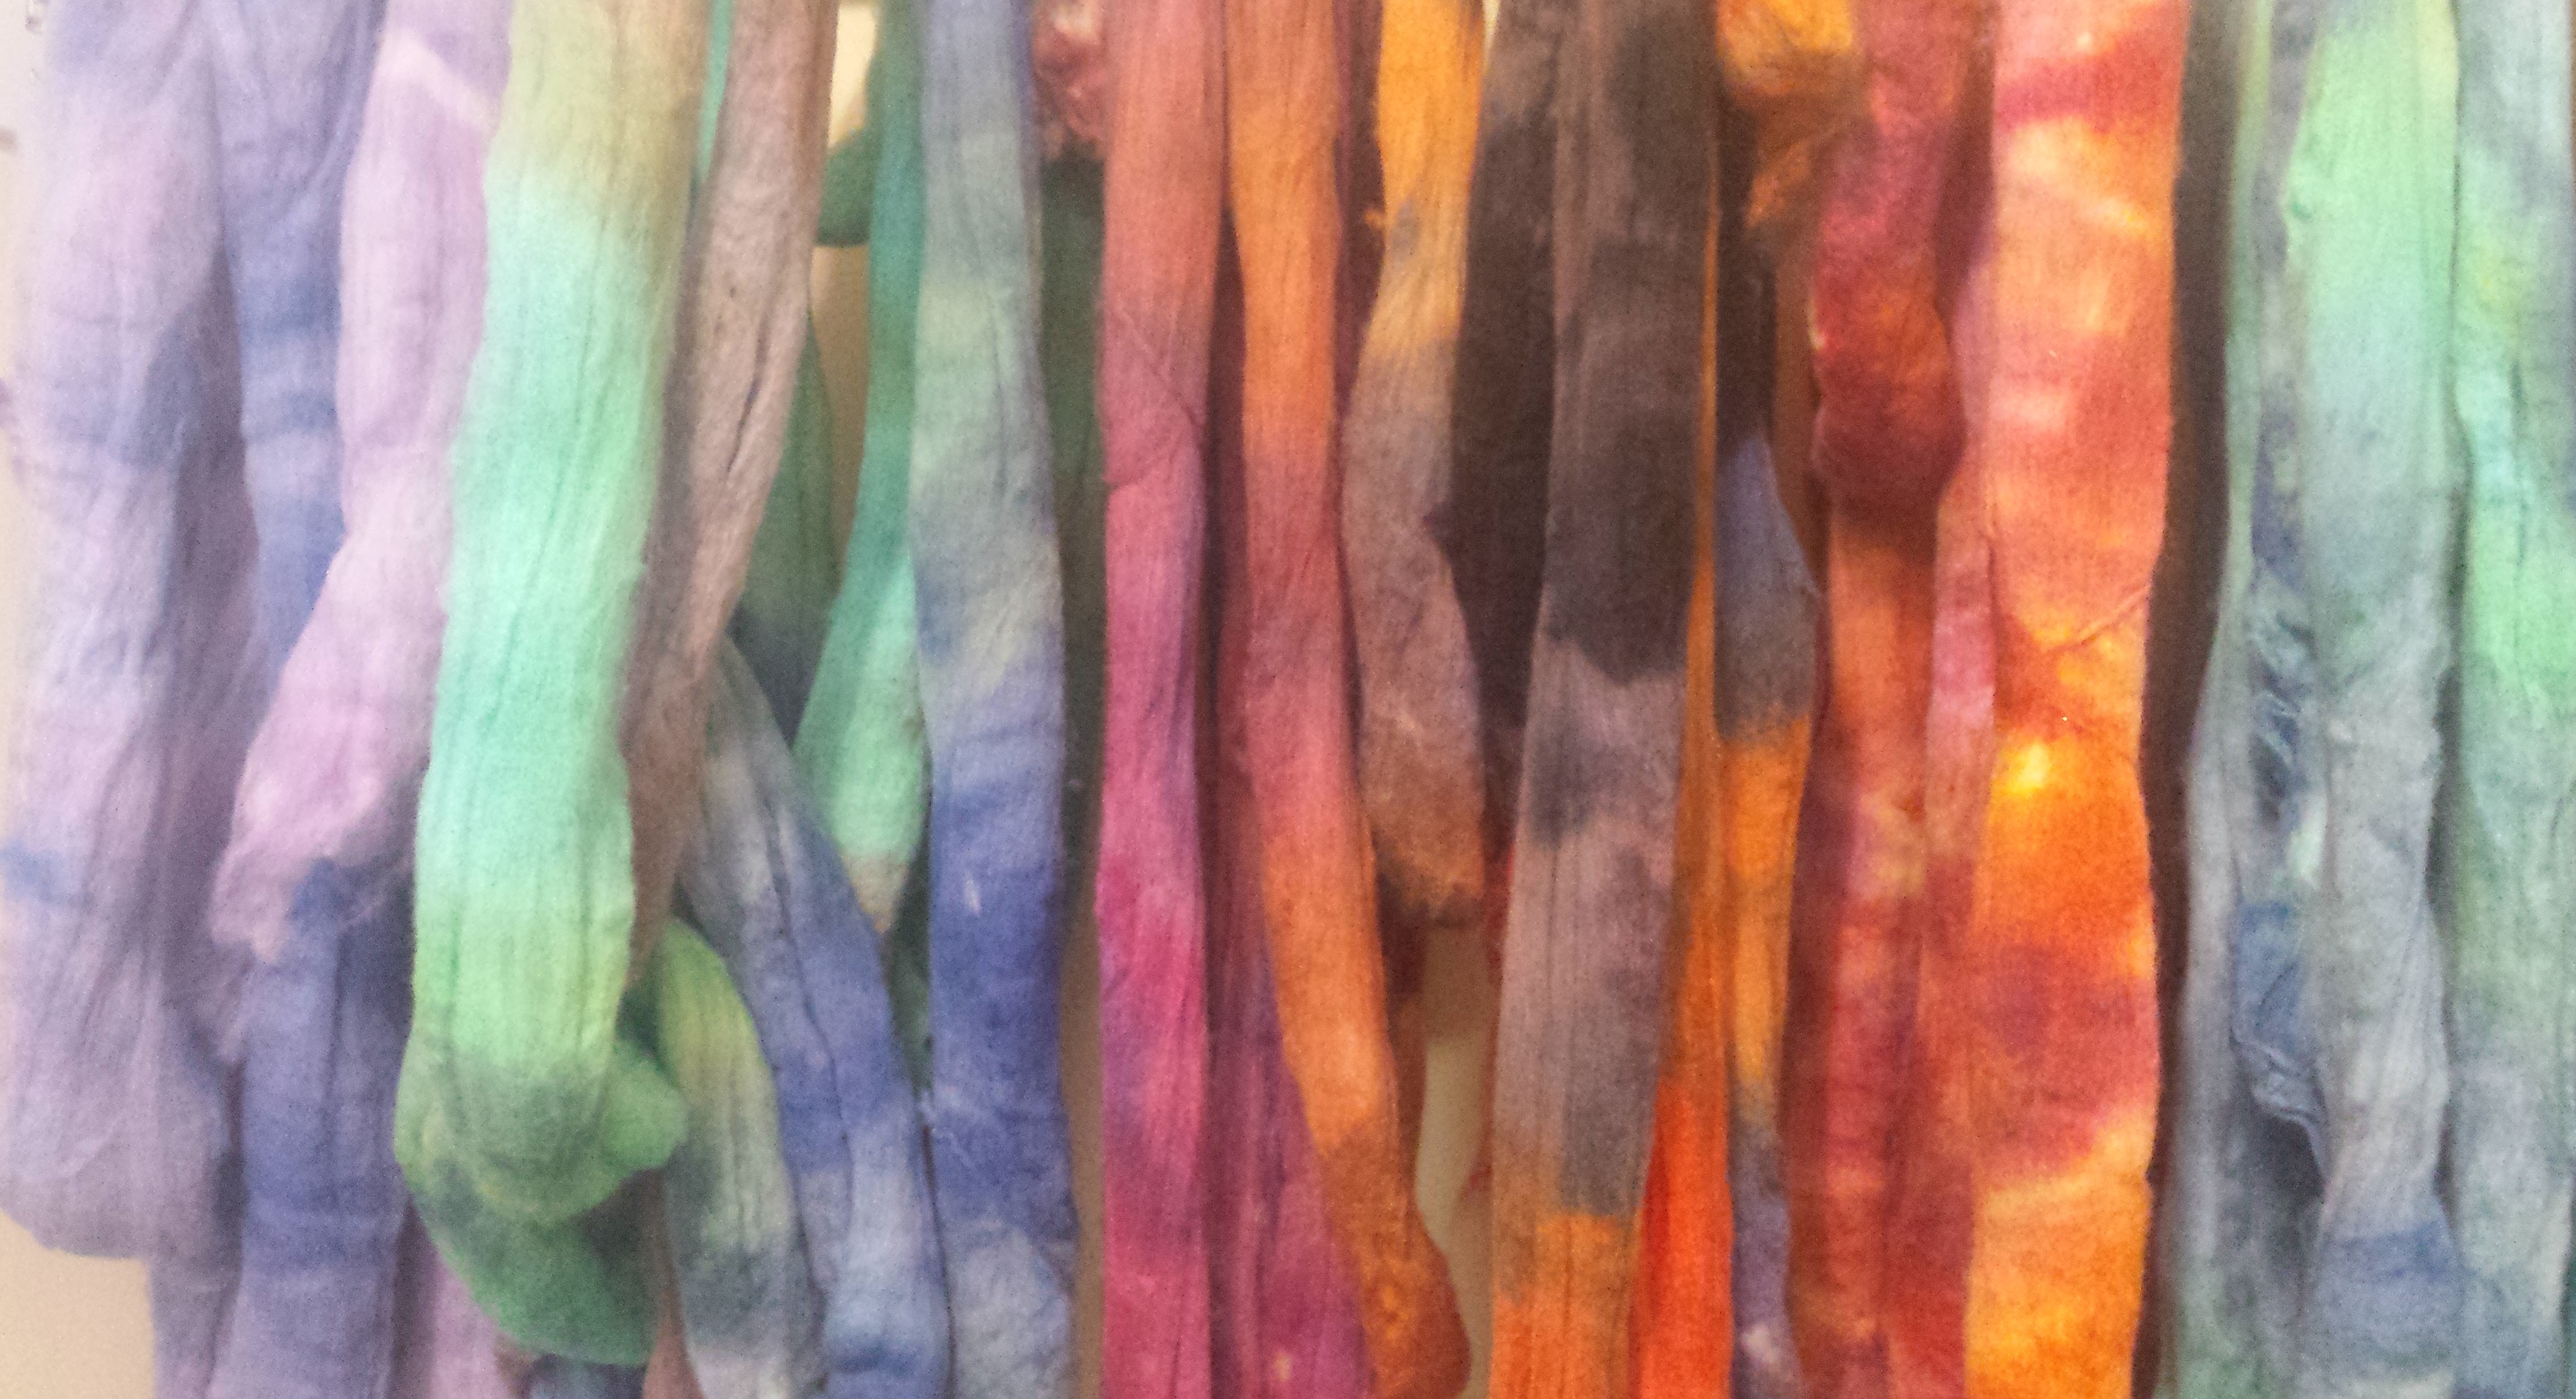 Polwarth Combed Top by Bewitching Fibers